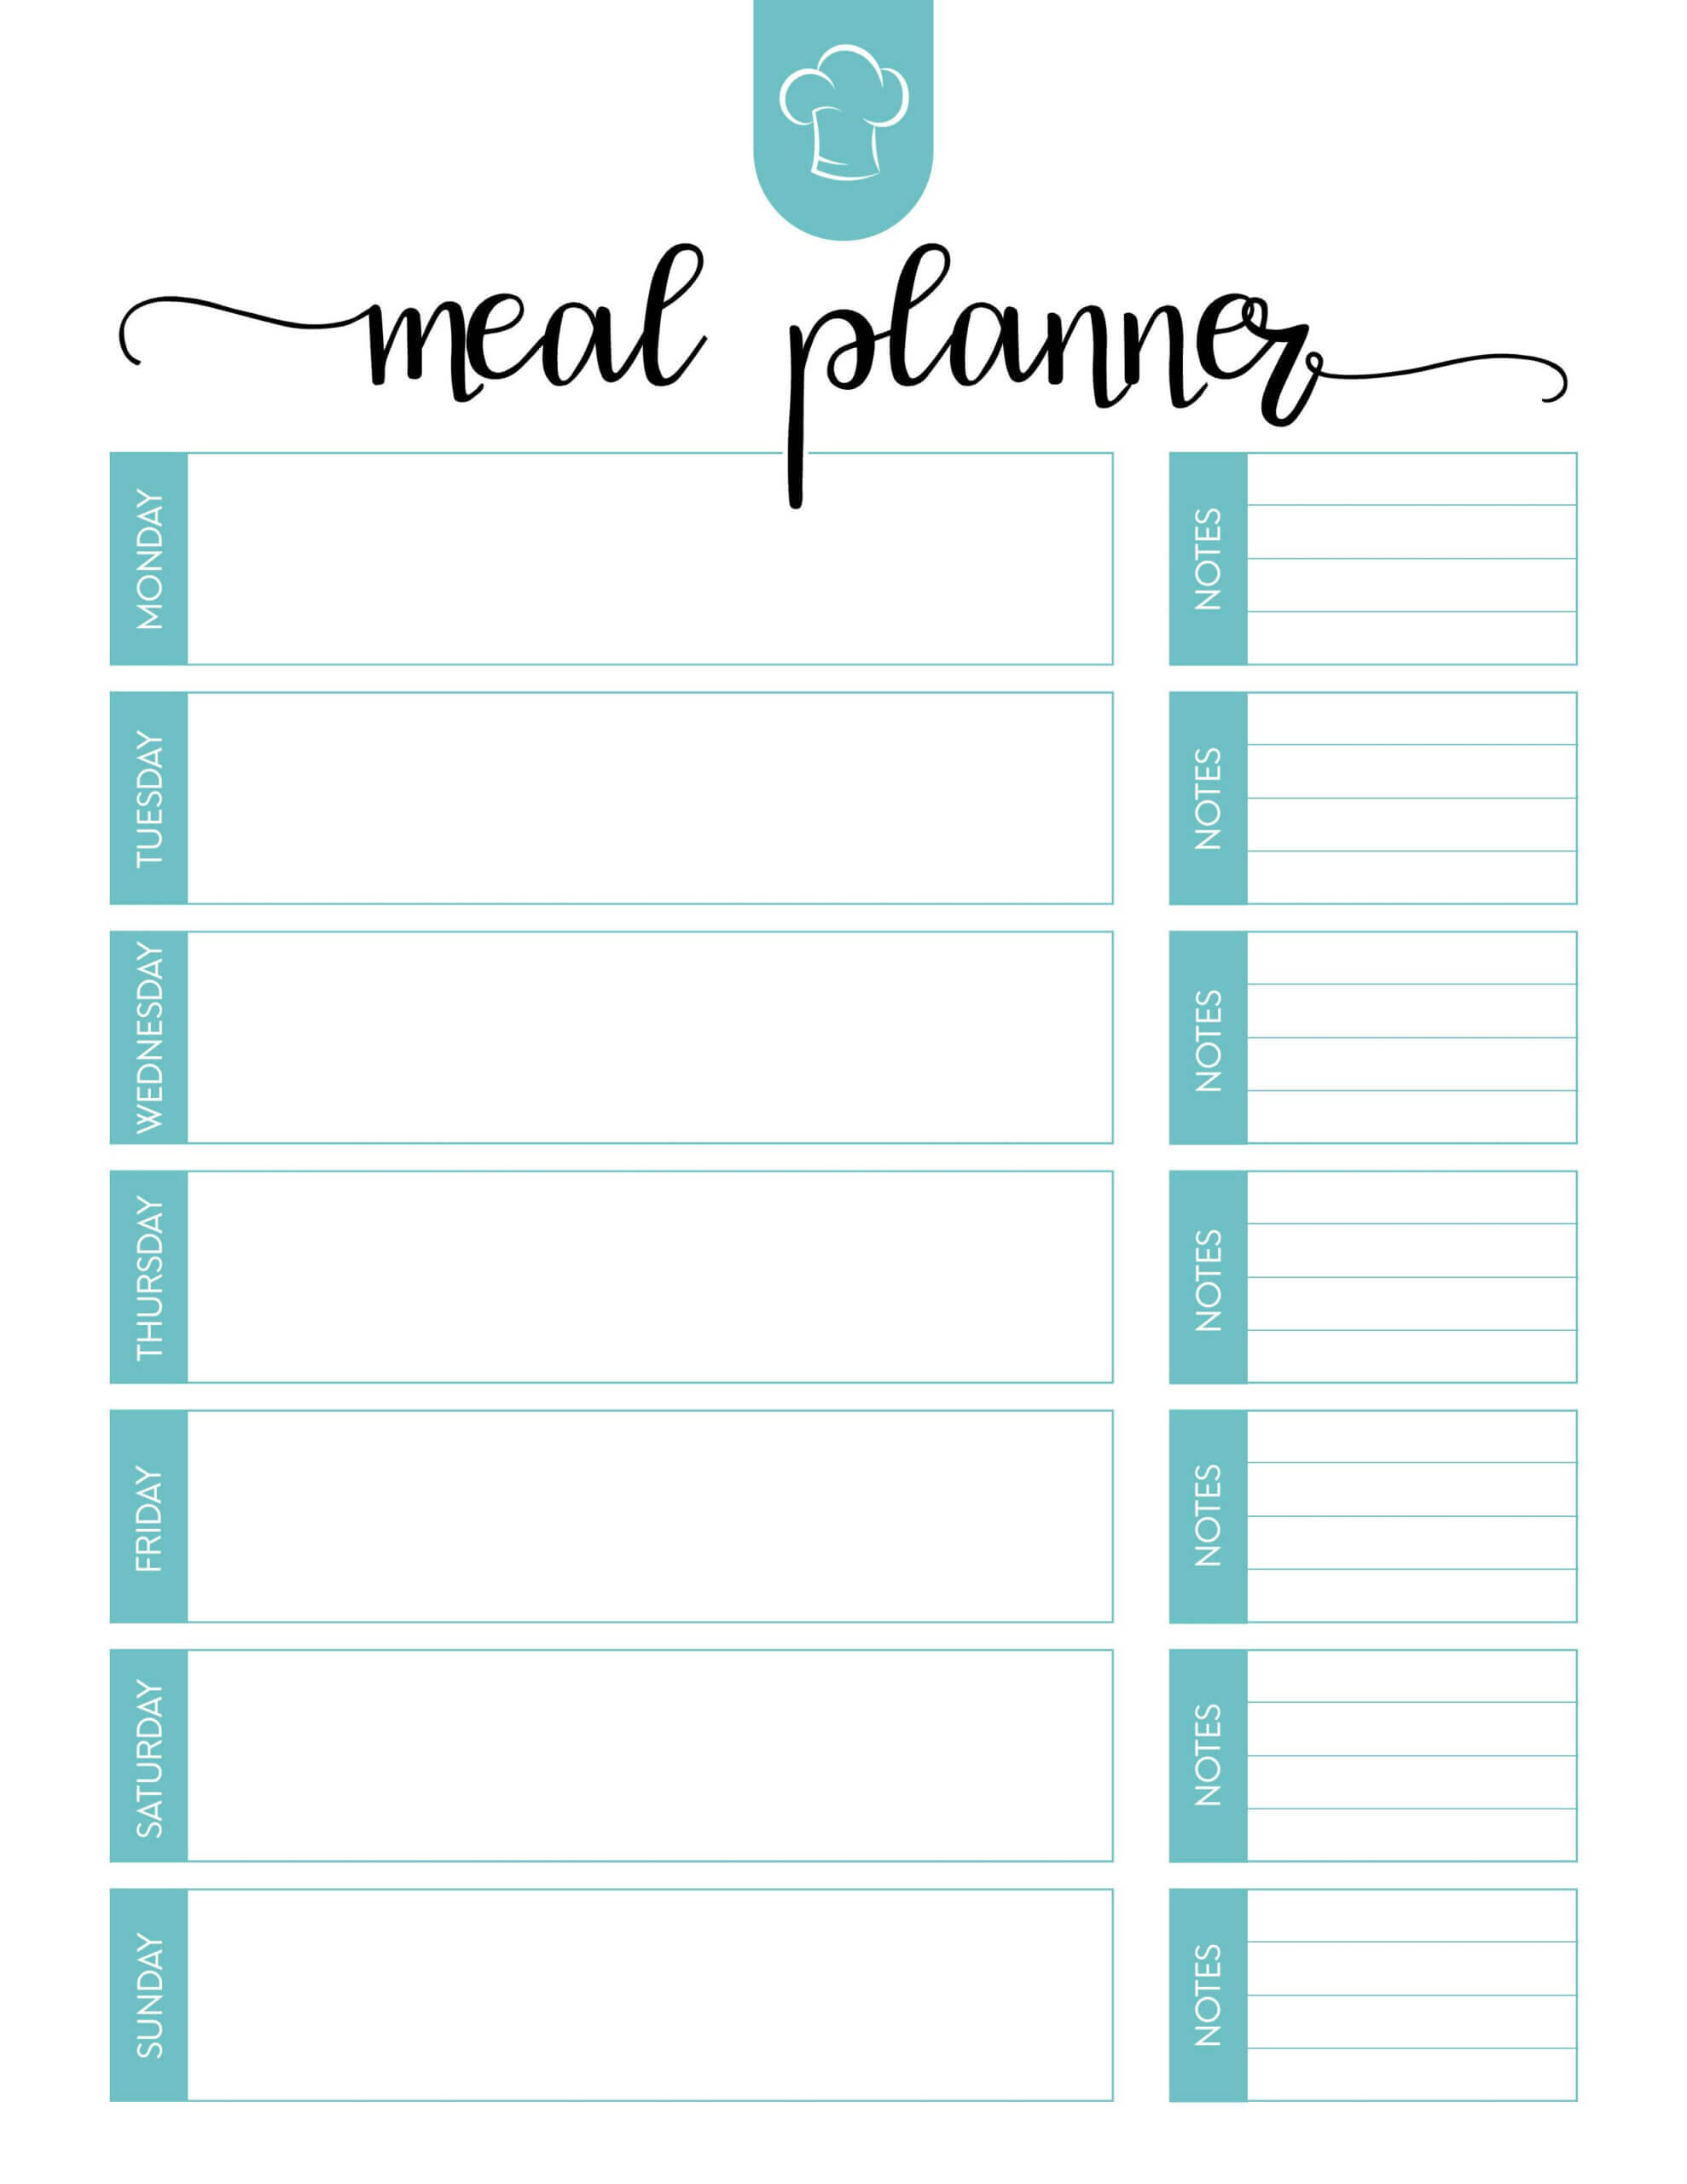 005 Free Menu Plan Template Unique Ideas Meal Planning In Menu Planning Template Word